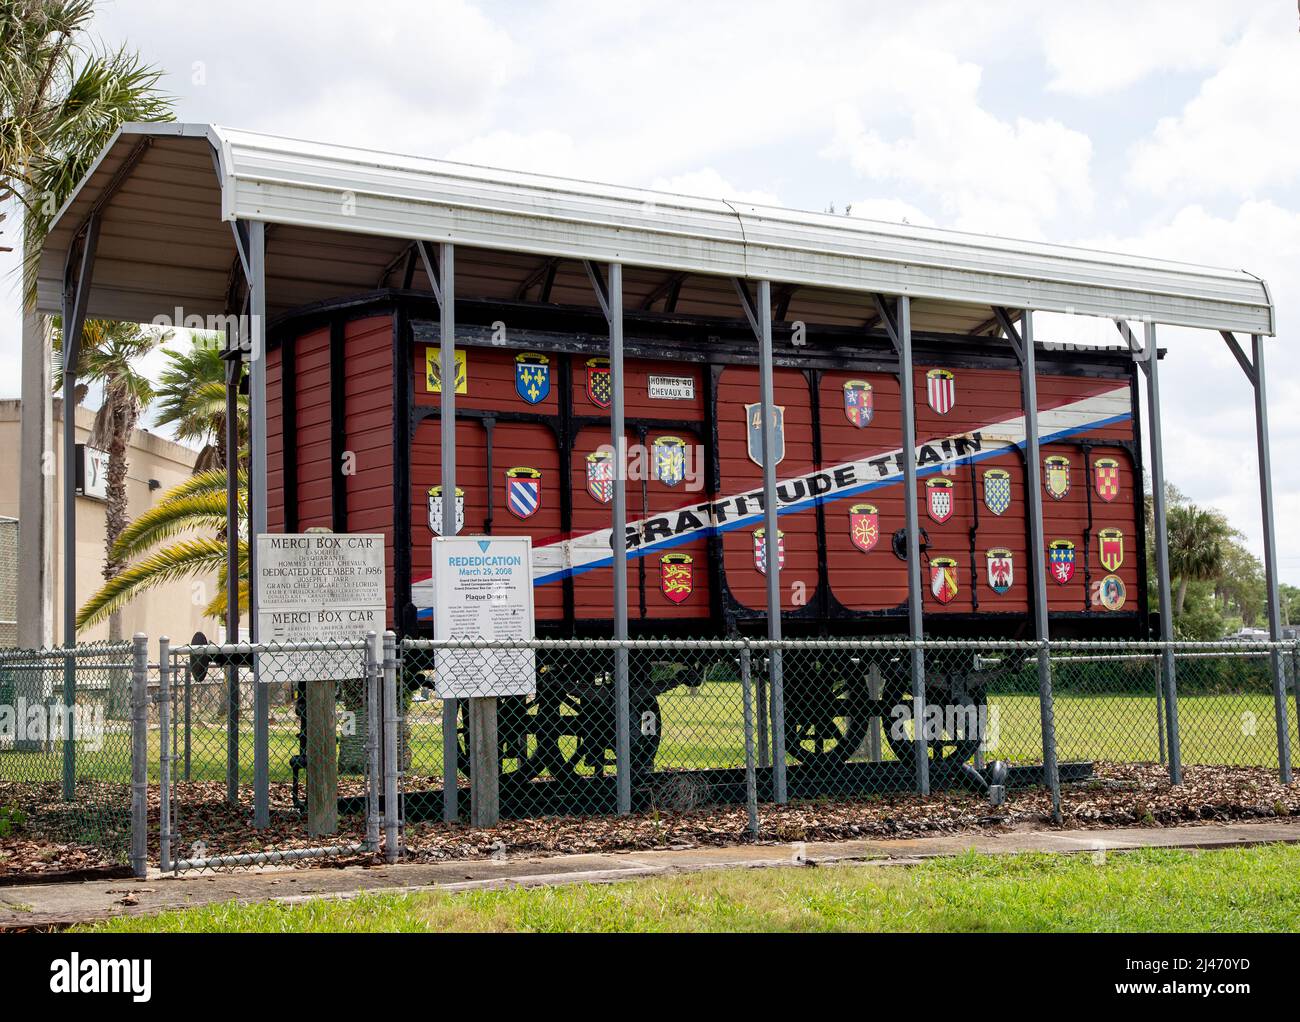 The Merci box car, gratitude train in Florida is located in Holly Hill next to City Hall in Veteran's Memorial Park Stock Photo